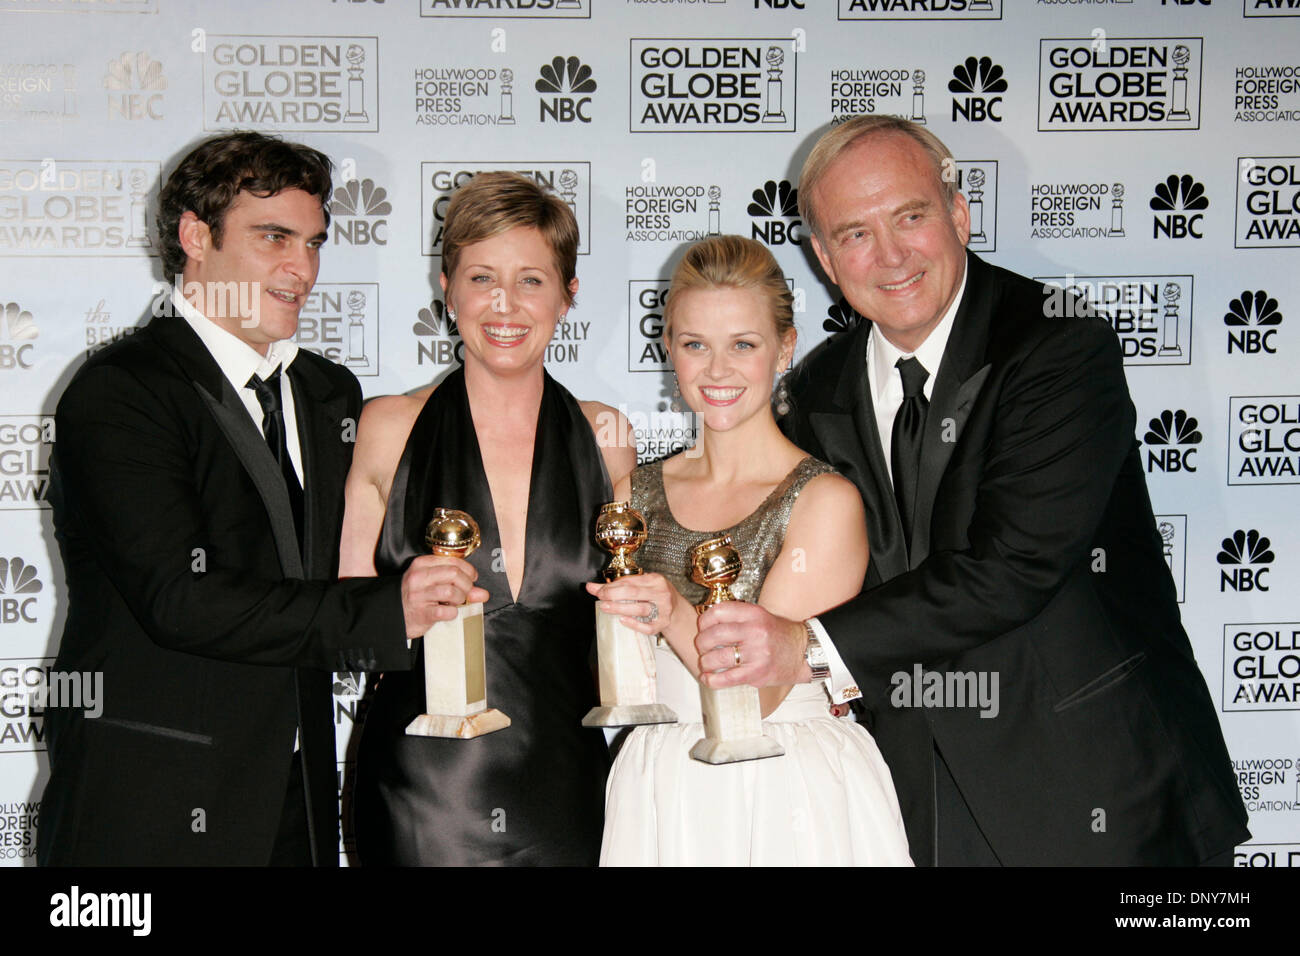 Jan 16, 2006; Beverly Hills, CA, USA; Golden Globes 2006: JOAQUIN PHOENIX, CATHY KONRAD, REESE WITHERSPOON and JAMES KEACH in the press room at the 63rd Annual Golden Globe Awards held at the Beverly Hilton Hotel. Mandatory Credit: Photo by Lisa O'Connor/ZUMA Press. (©) Copyright 2006 by Lisa O'Connor Stock Photo